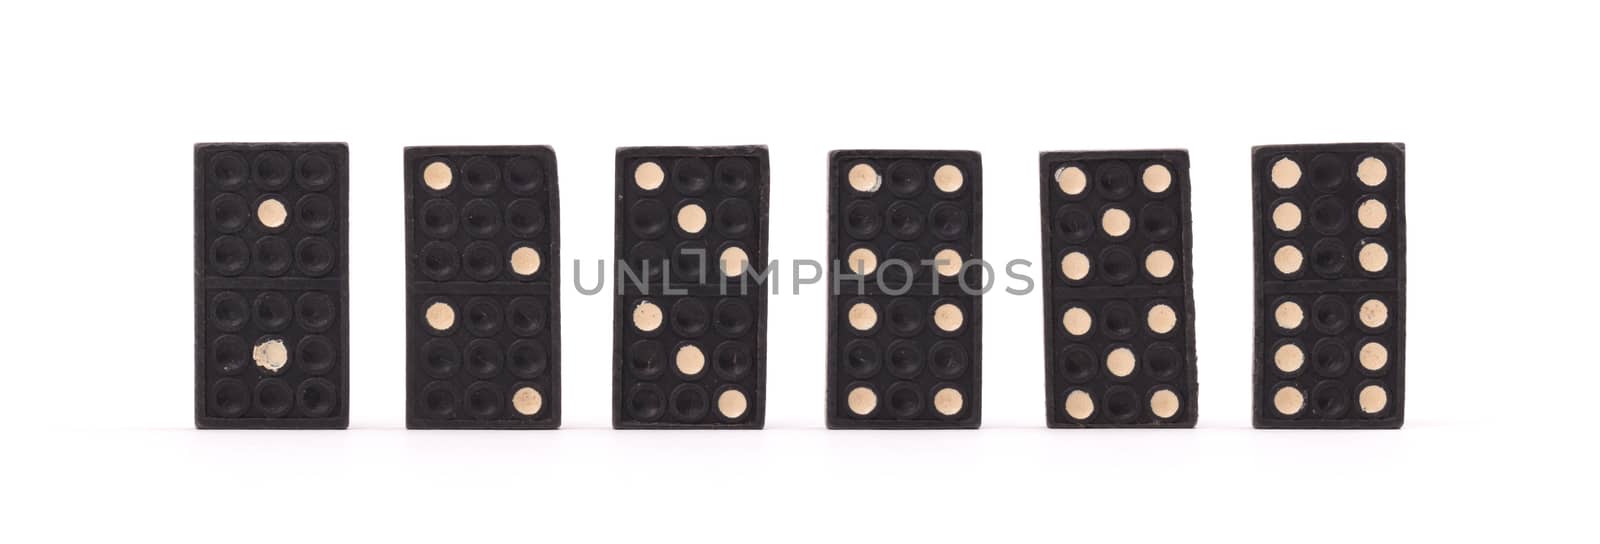 Old domino game isolated on a white background